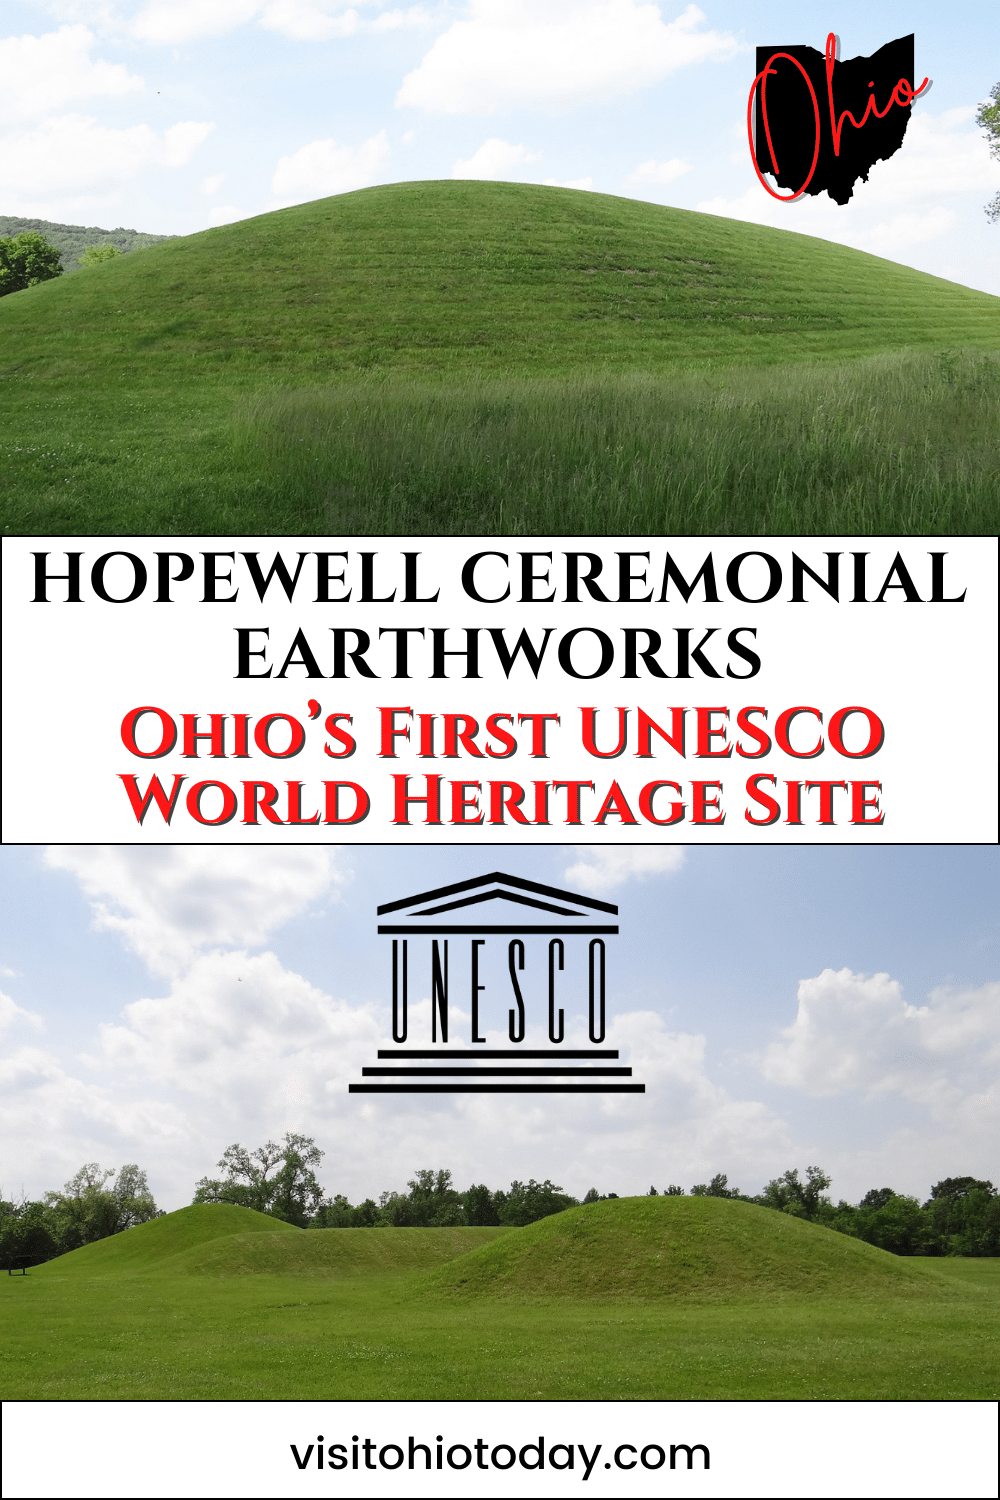 vertical image with a photo at the top of the Seip Earthworks, and a photo at the bottom of the Mound City Group. A white strip across the middle has the text Hopewell Ceremonial Earthworks Ohio's First UNESCO World Heritage Site. Image via Jaci Starkey on Flickr with permission